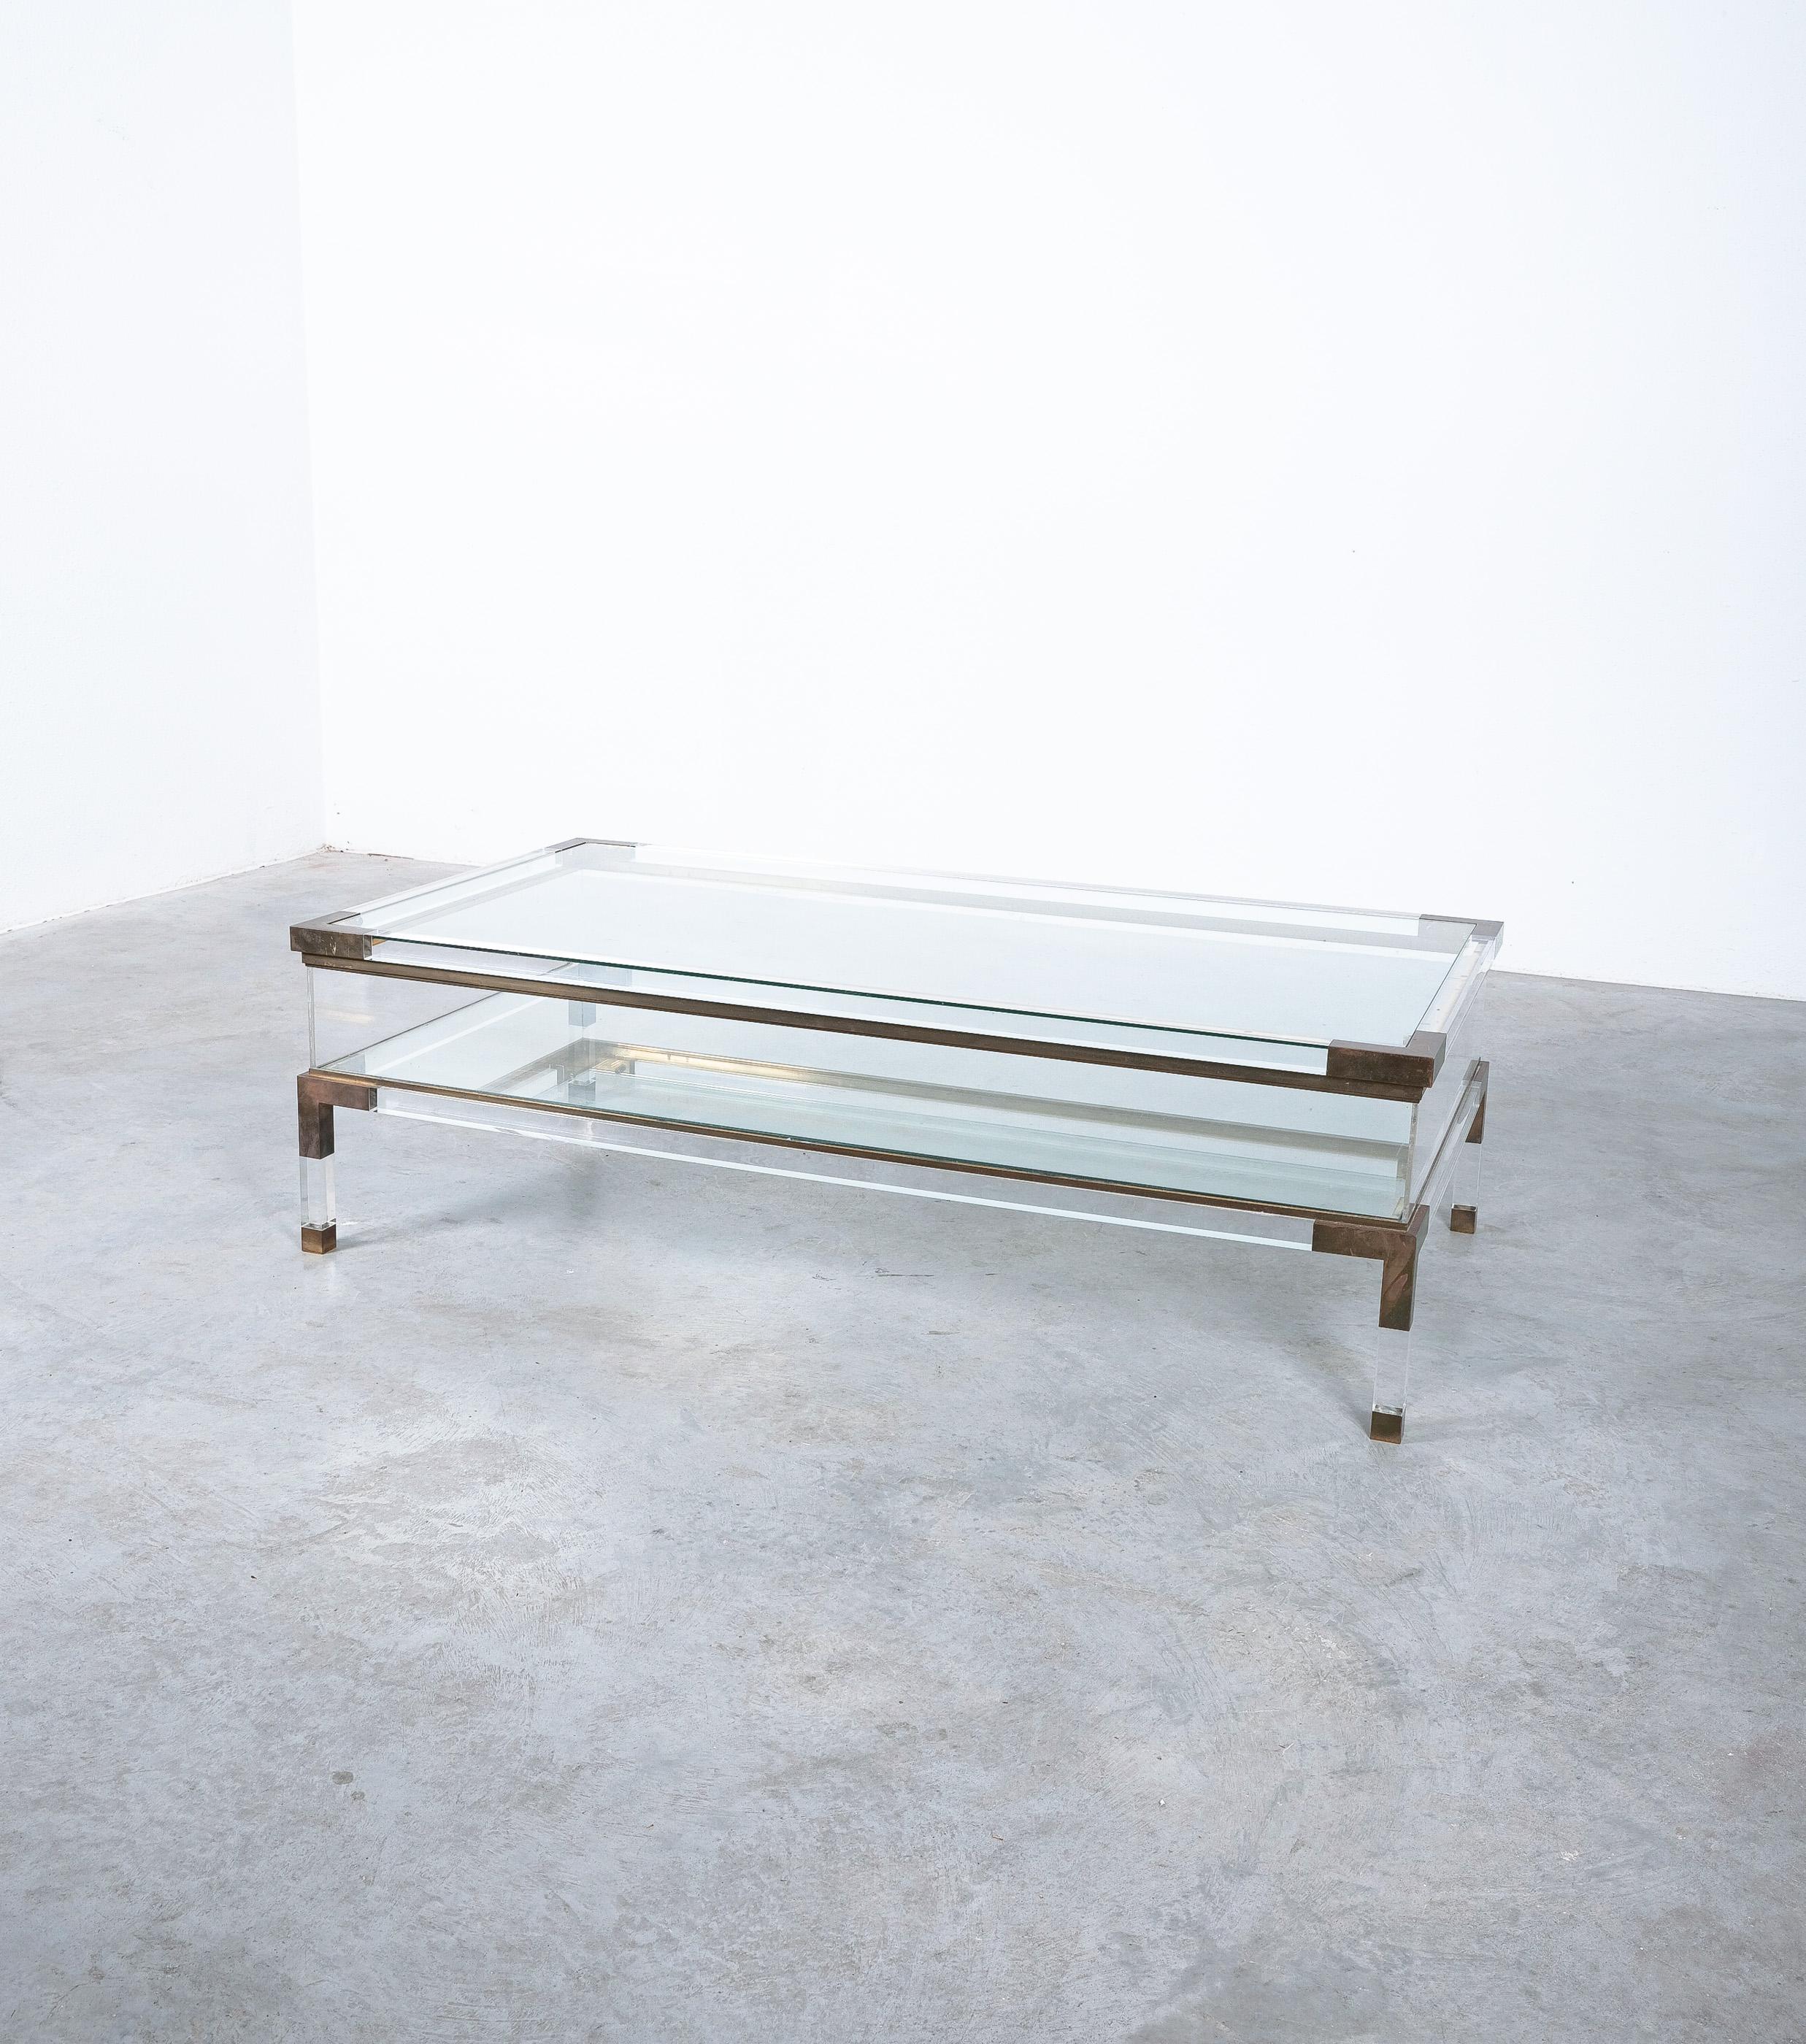 Large vitrine coffee table by Maison Jansen, France mid-century.

Beautiful coffee table by Maison Jansen, 1970, France, featuring polished Lucite elements with brass joints and two glass tops. The lucite and brass framed glass top can slide open